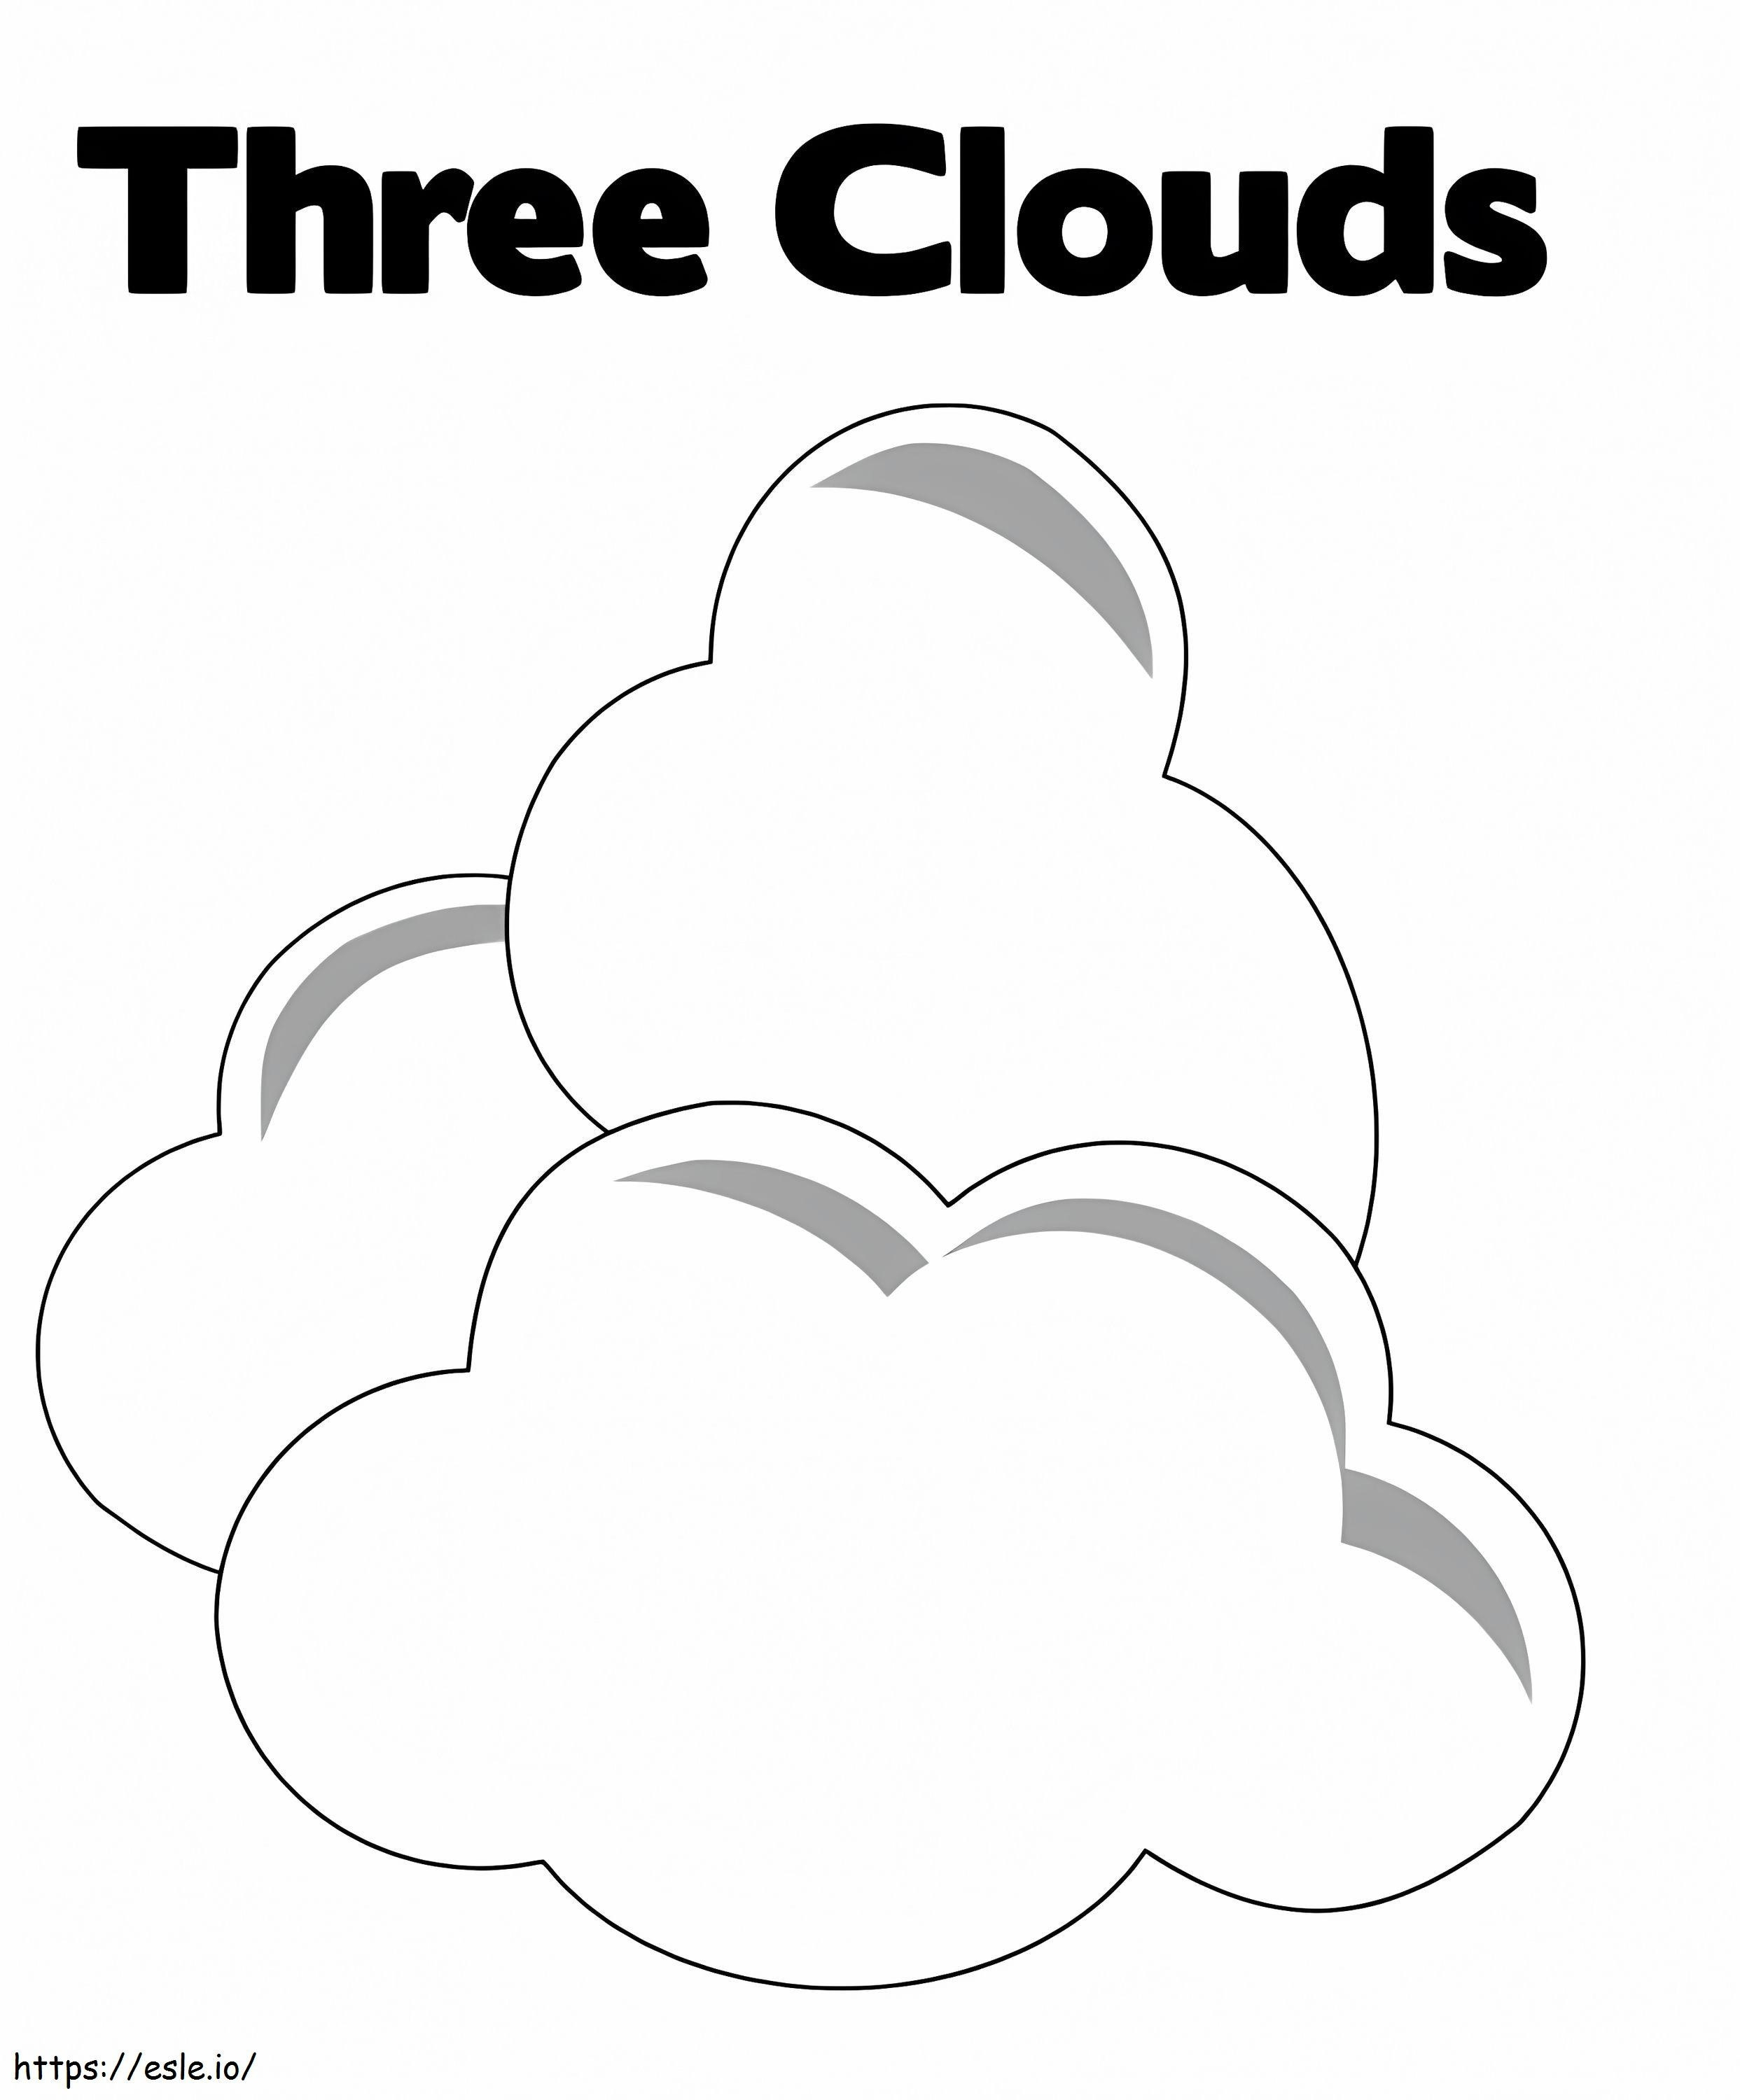 Three Clouds coloring page